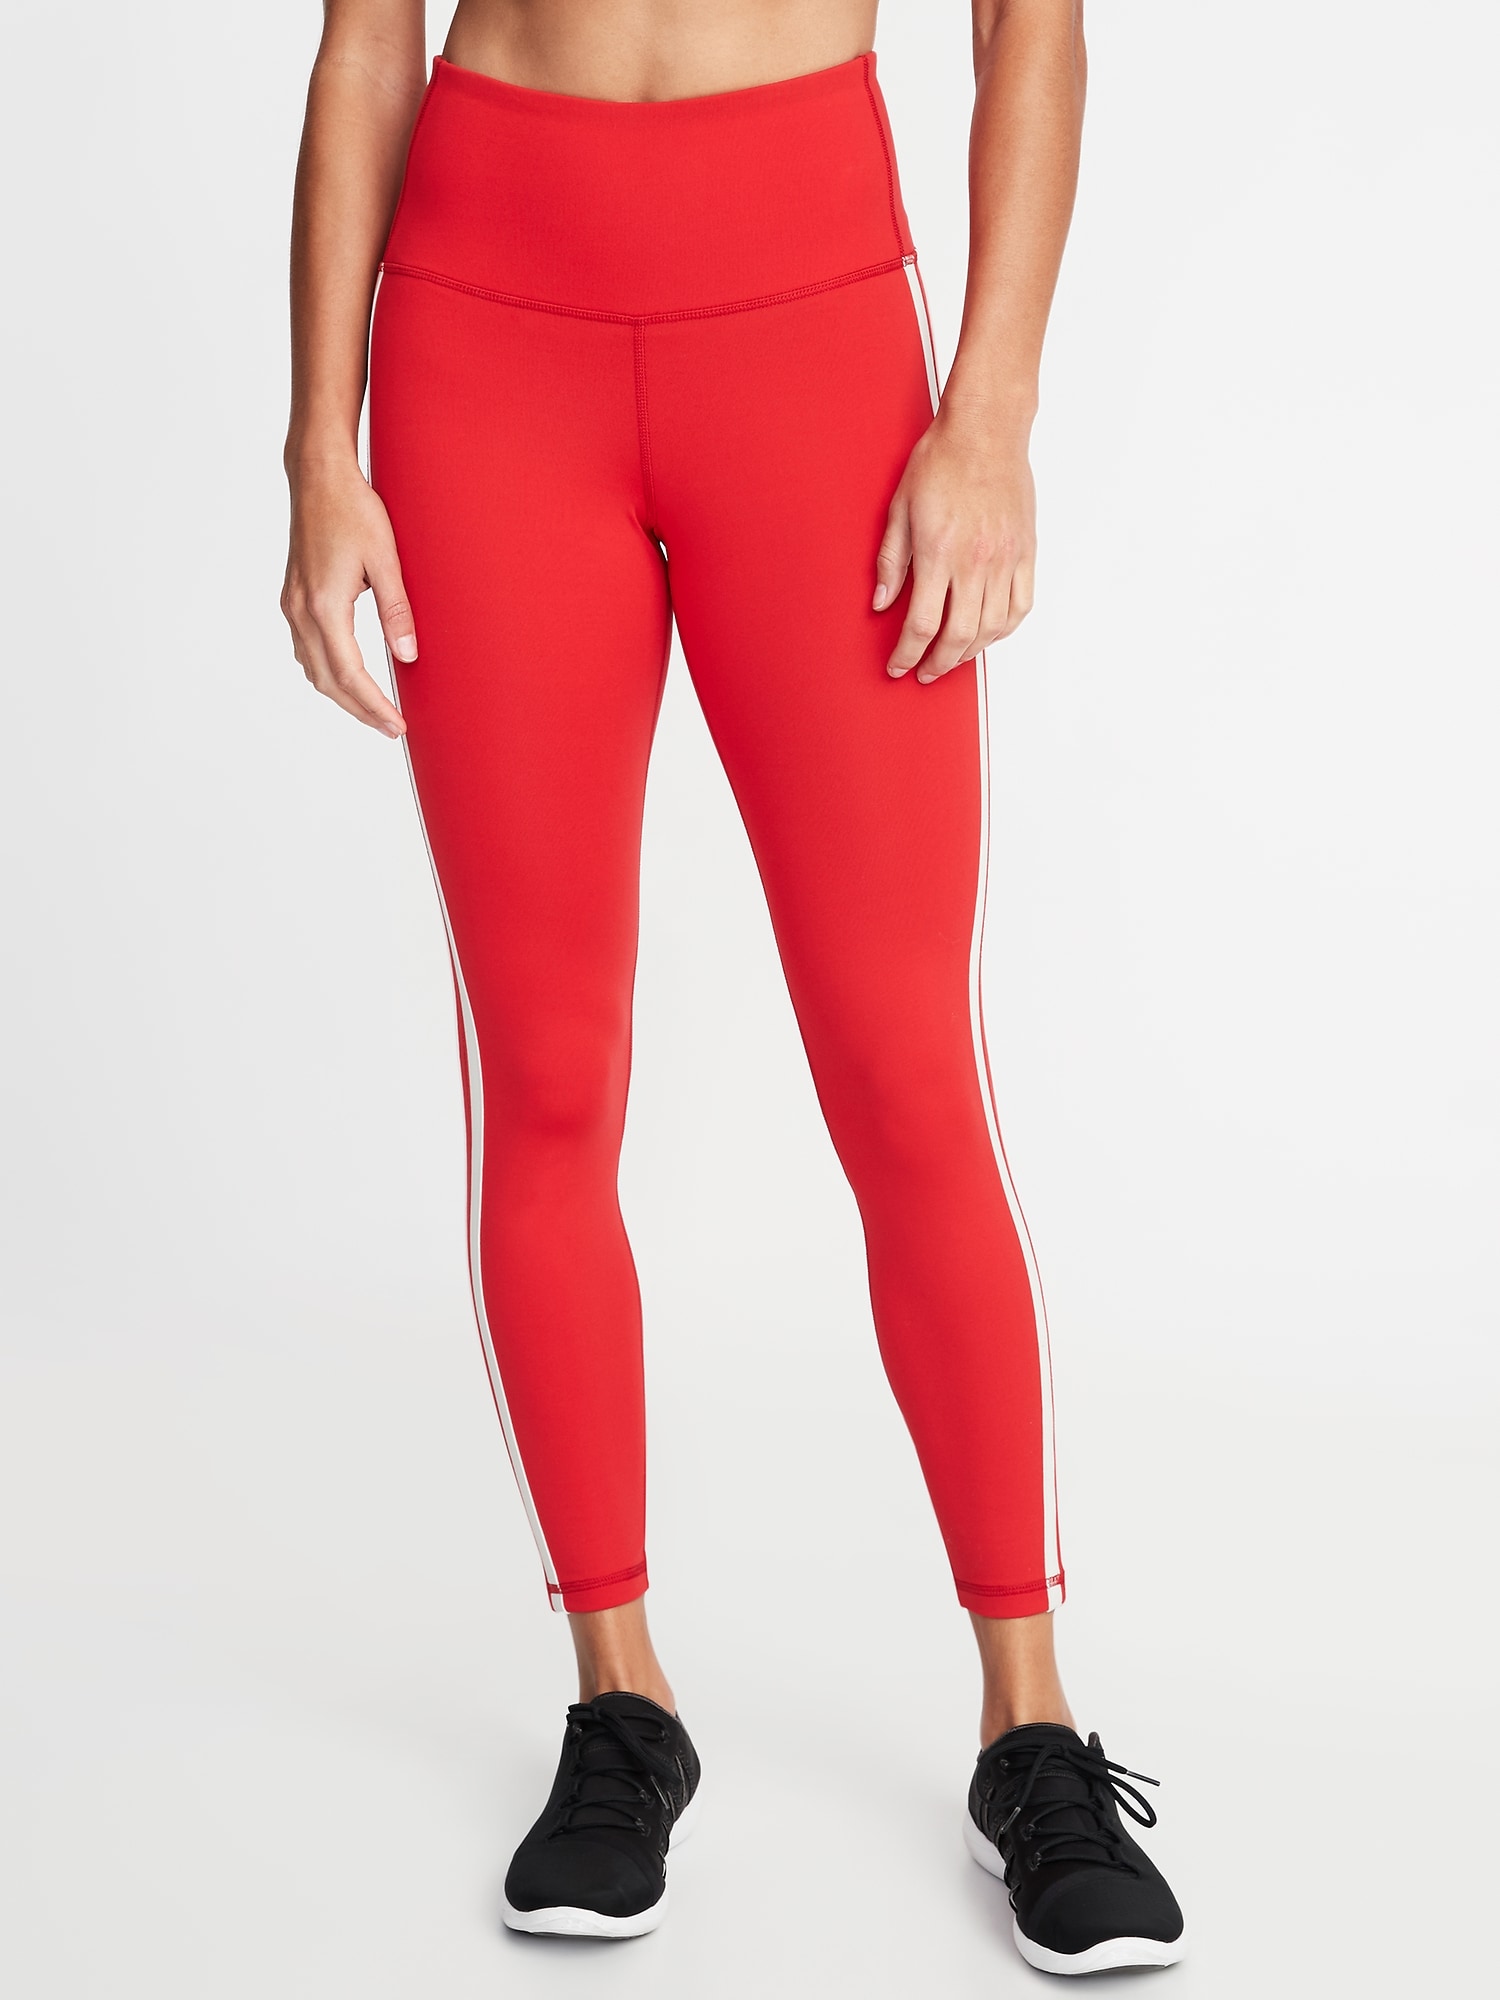 High-Waisted Elevate Side-Stripe 7/8-Length Compression Leggings For Women